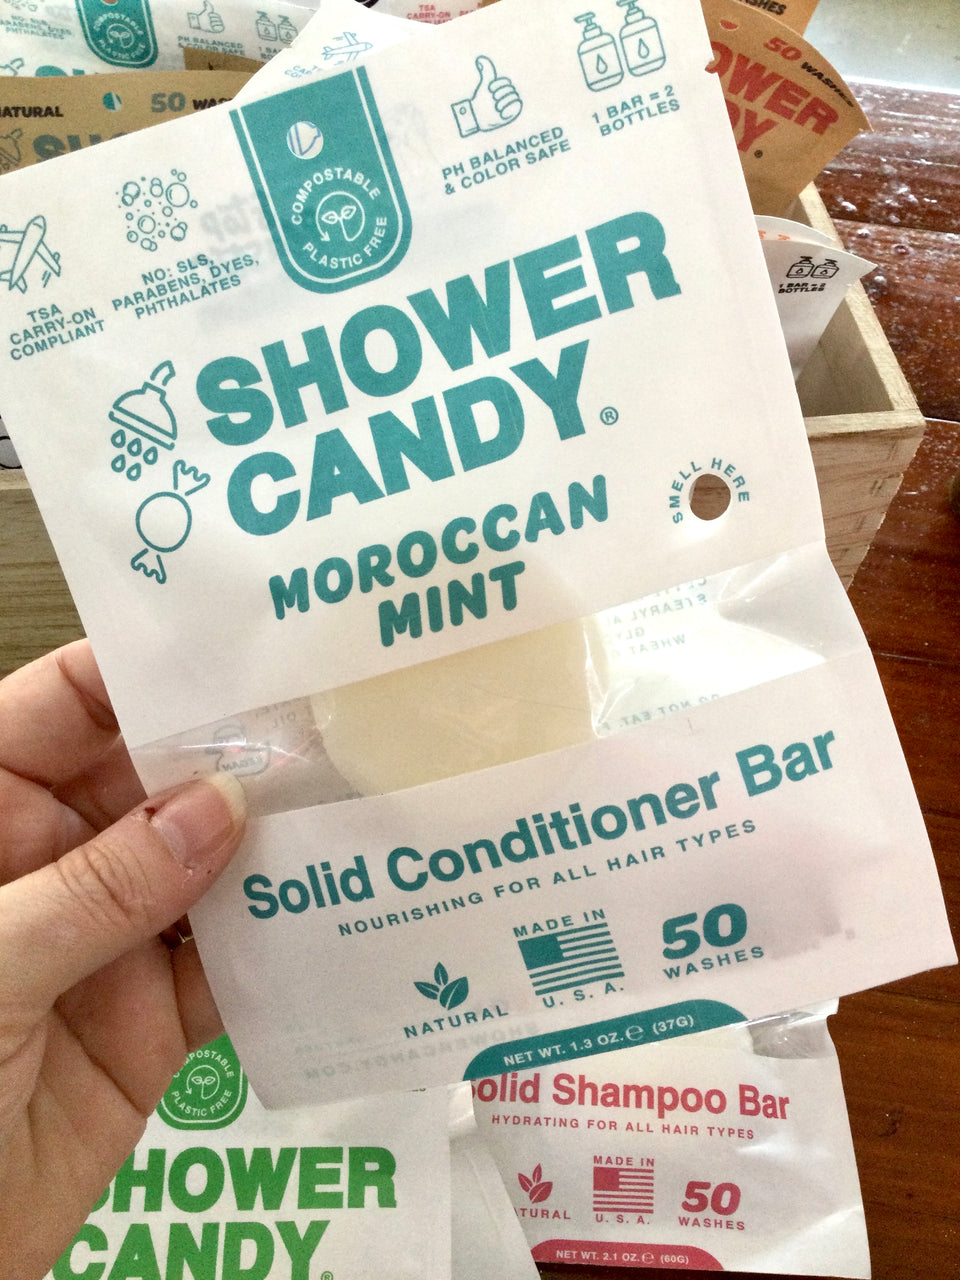 Showing conditioner bar Moroccan Mint